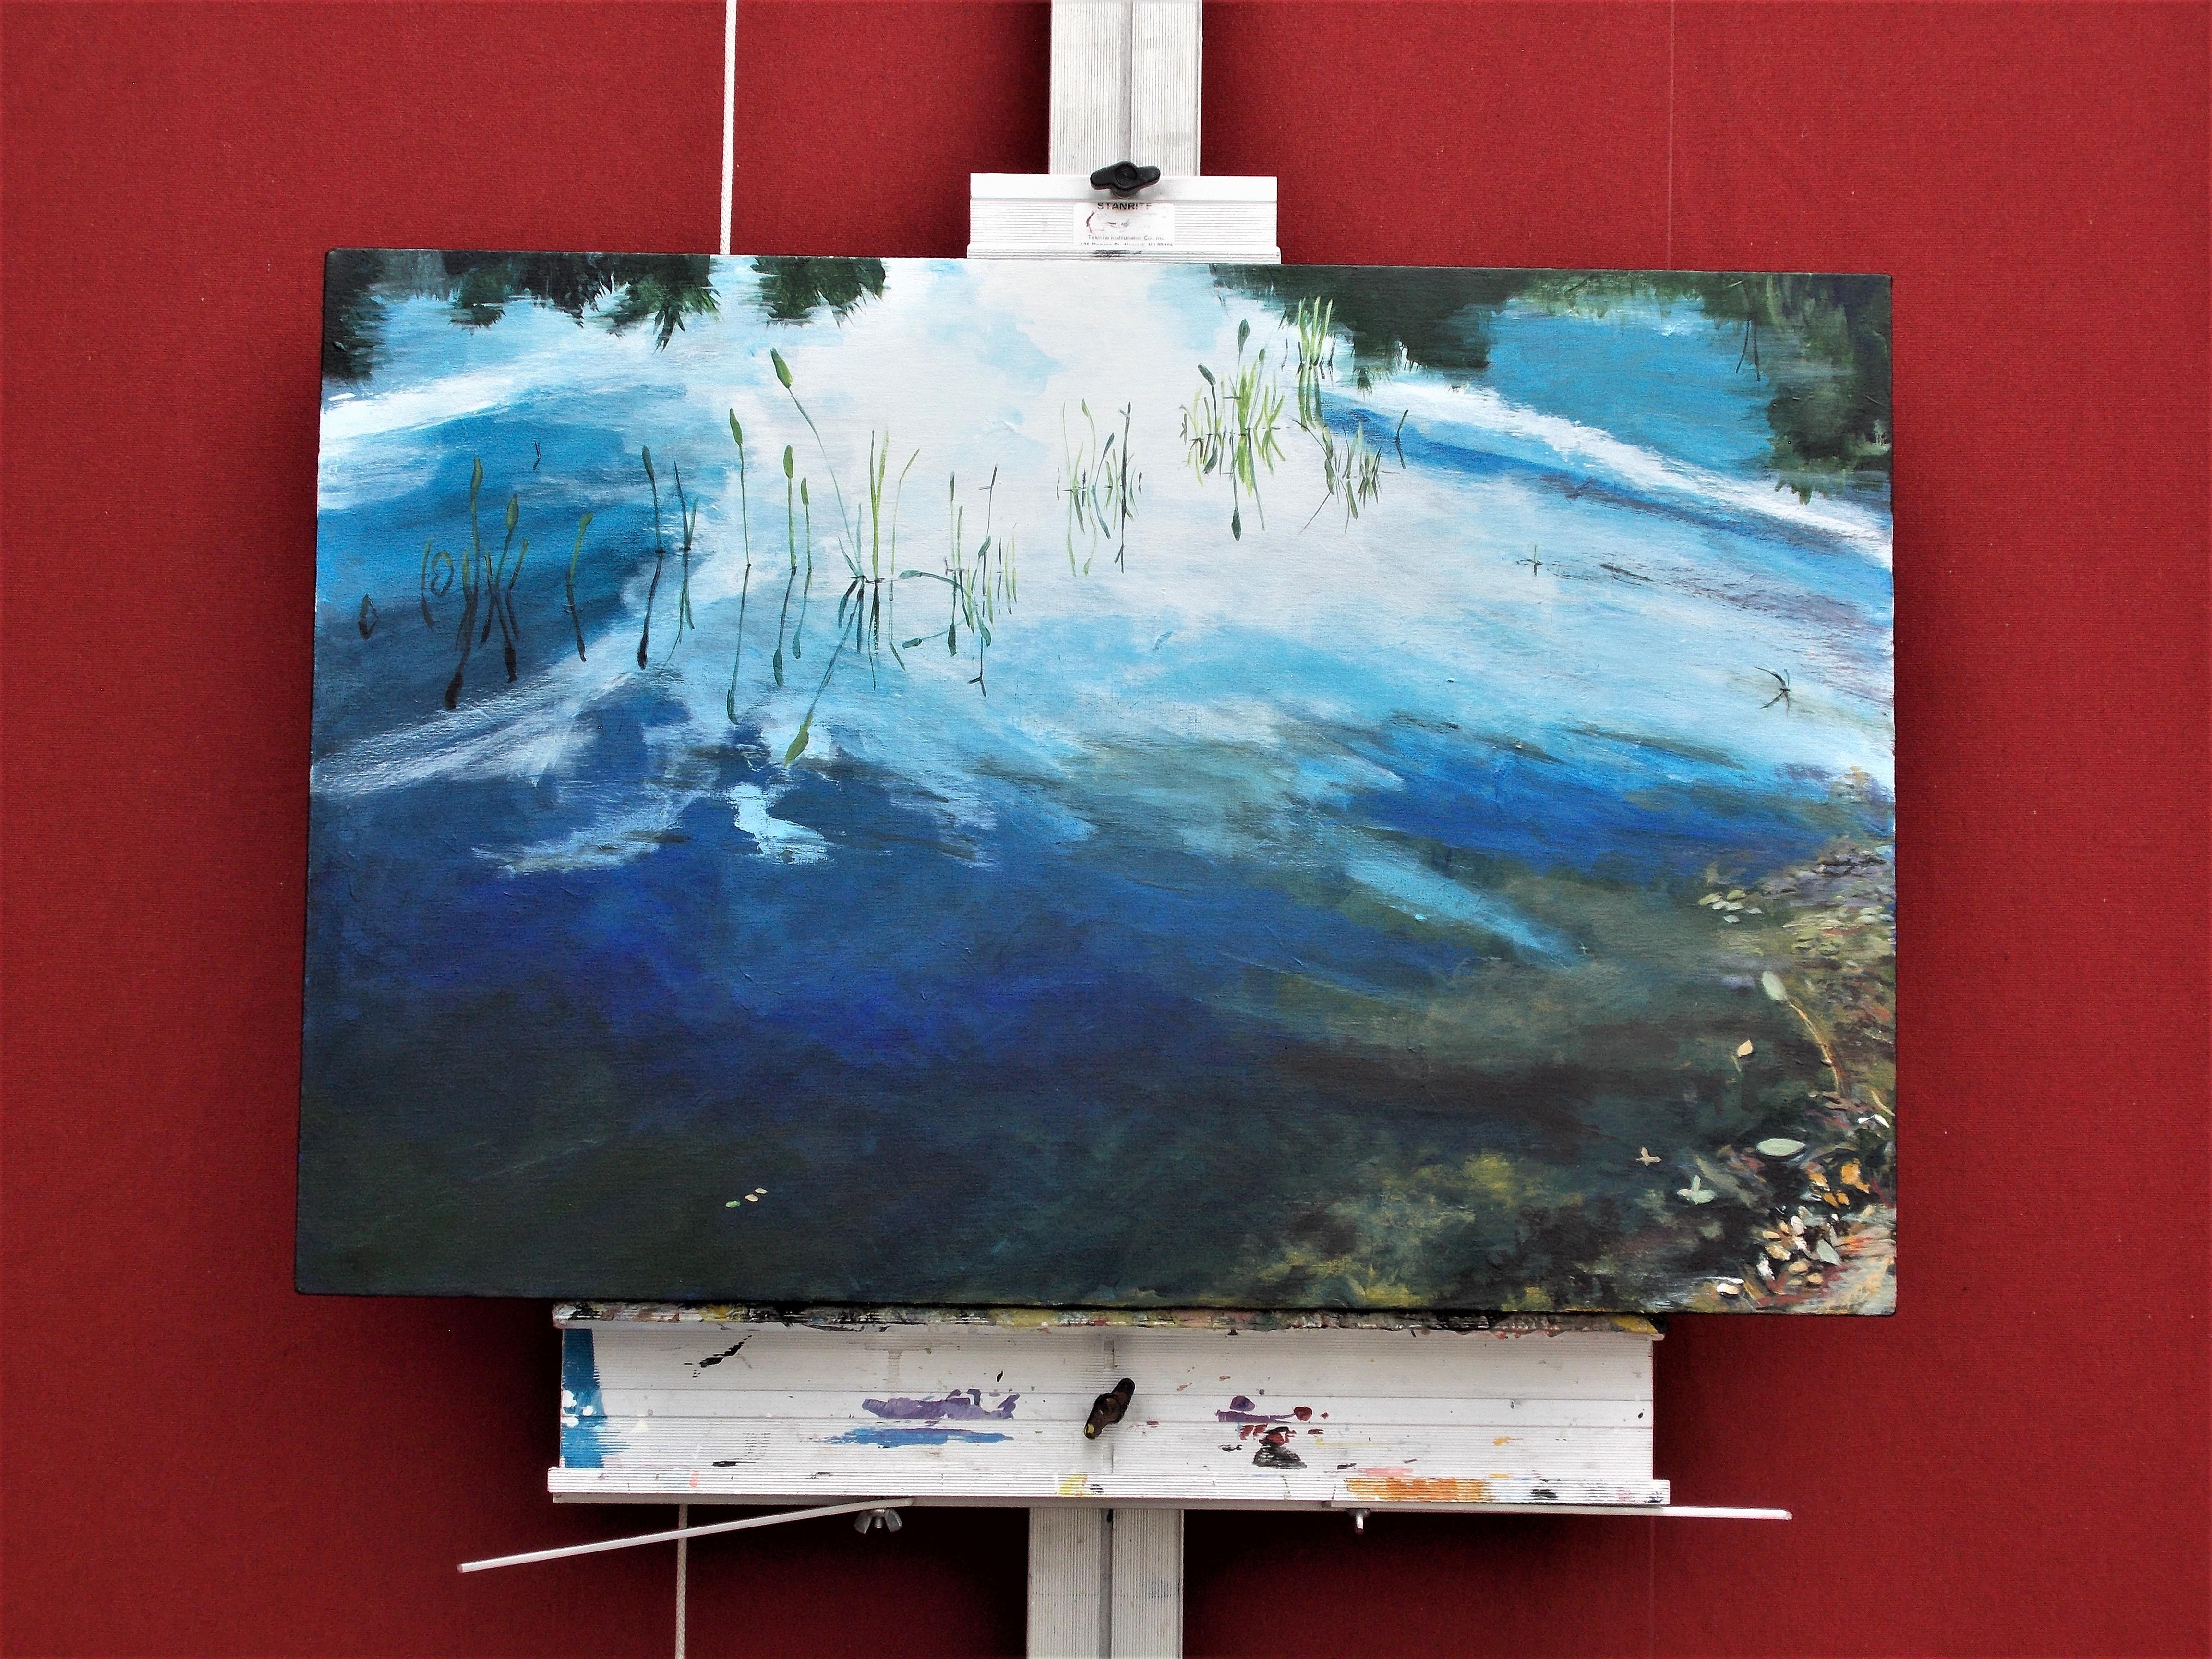 <p>Artist Comments<br>A luminous view of a pond capturing the gentle ripple of the water. Slender blades of grass emerge, casting reflections on the surface. When asked about his process, artist Benjamin Thomas explained the labor intensive work